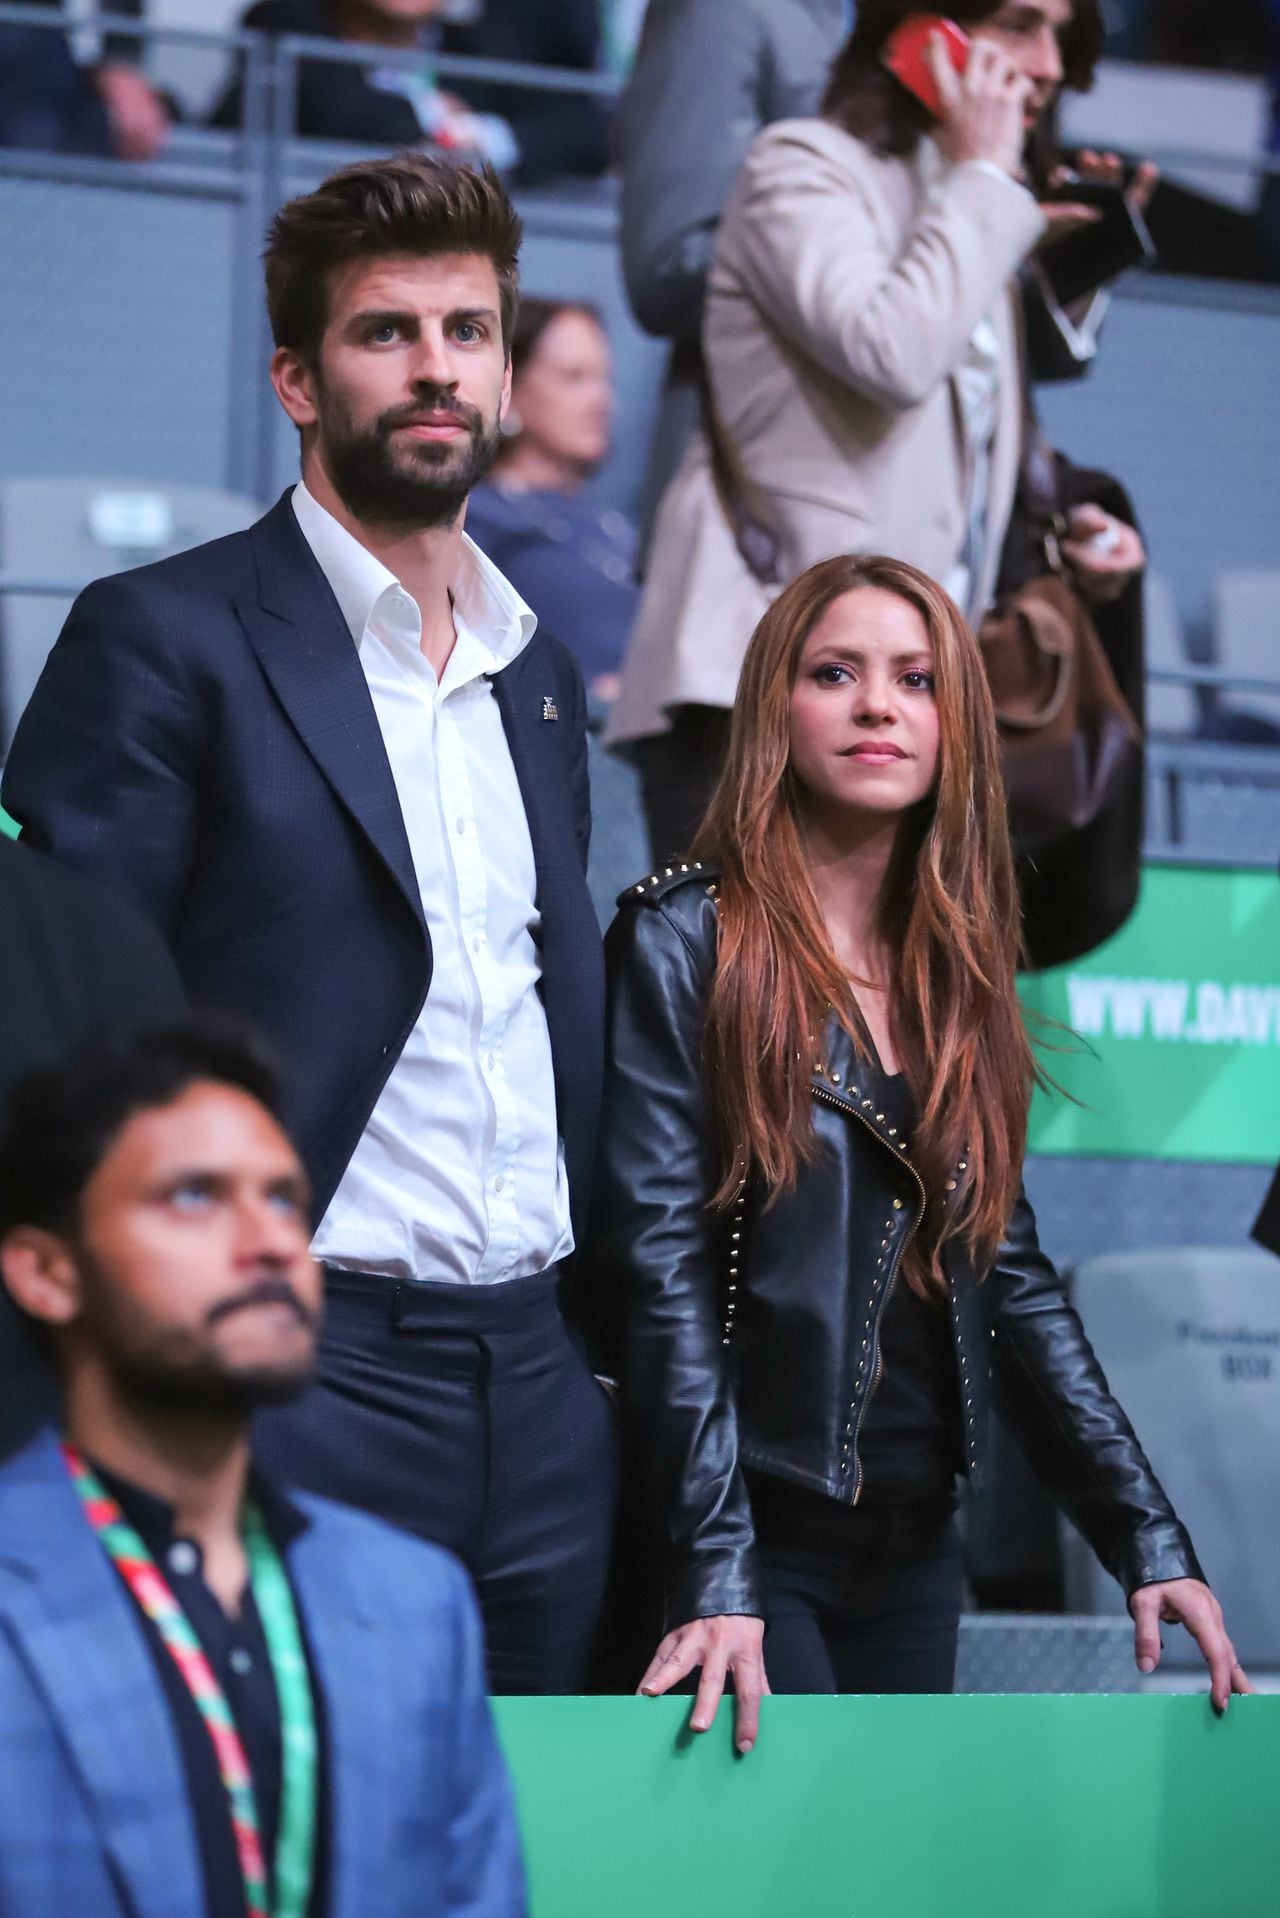 Shakira supported Piqué in all his projects